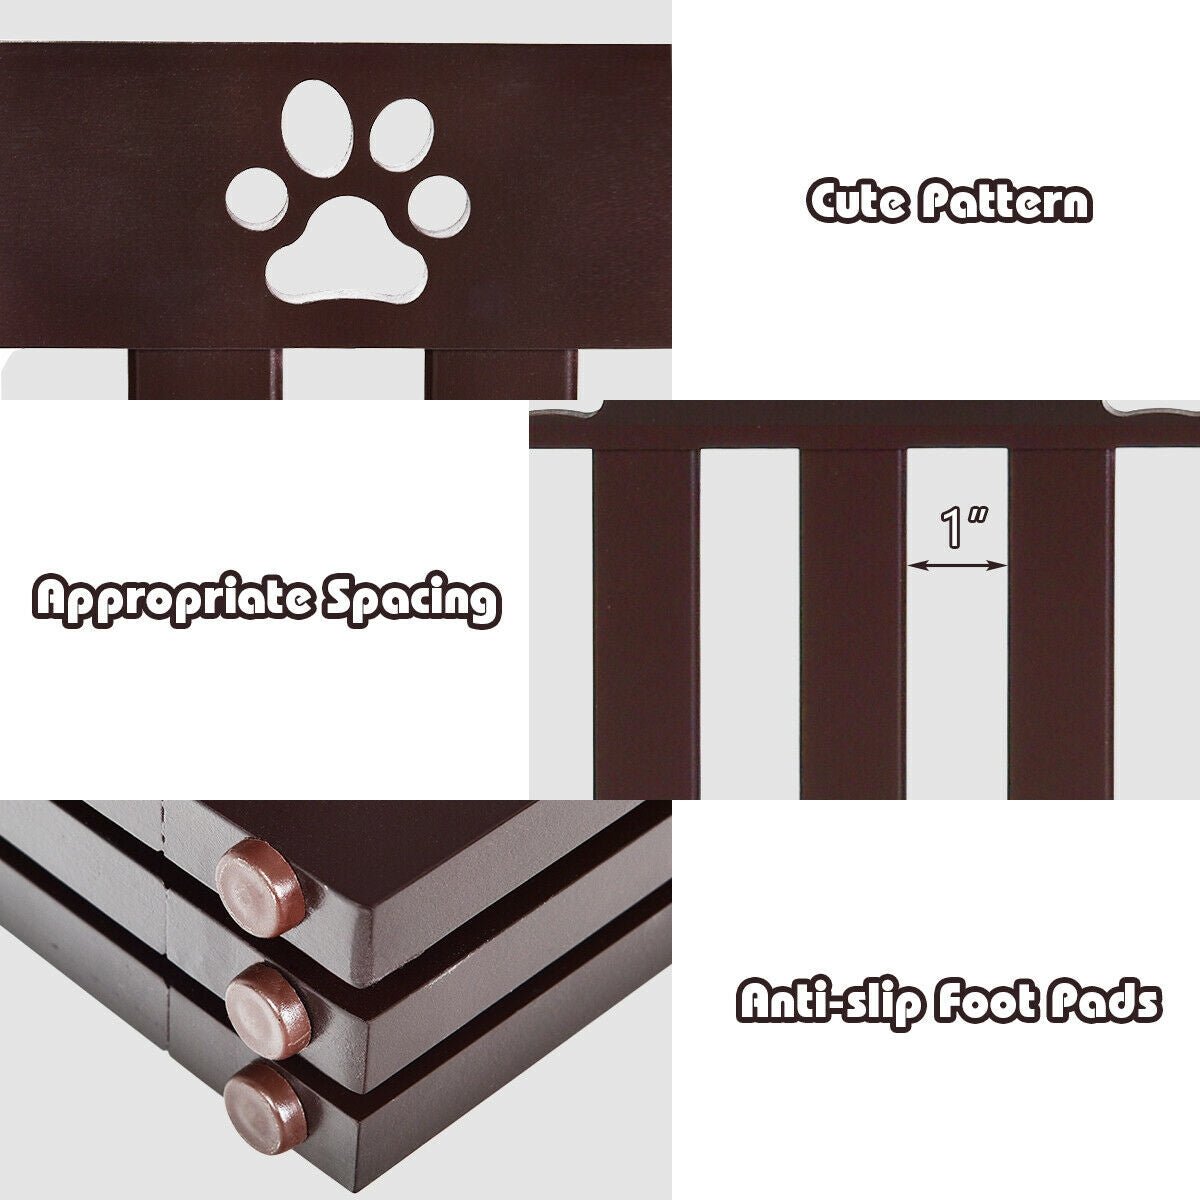 36 Inch Folding Wooden Freestanding Pet Gate with 360° Hinge